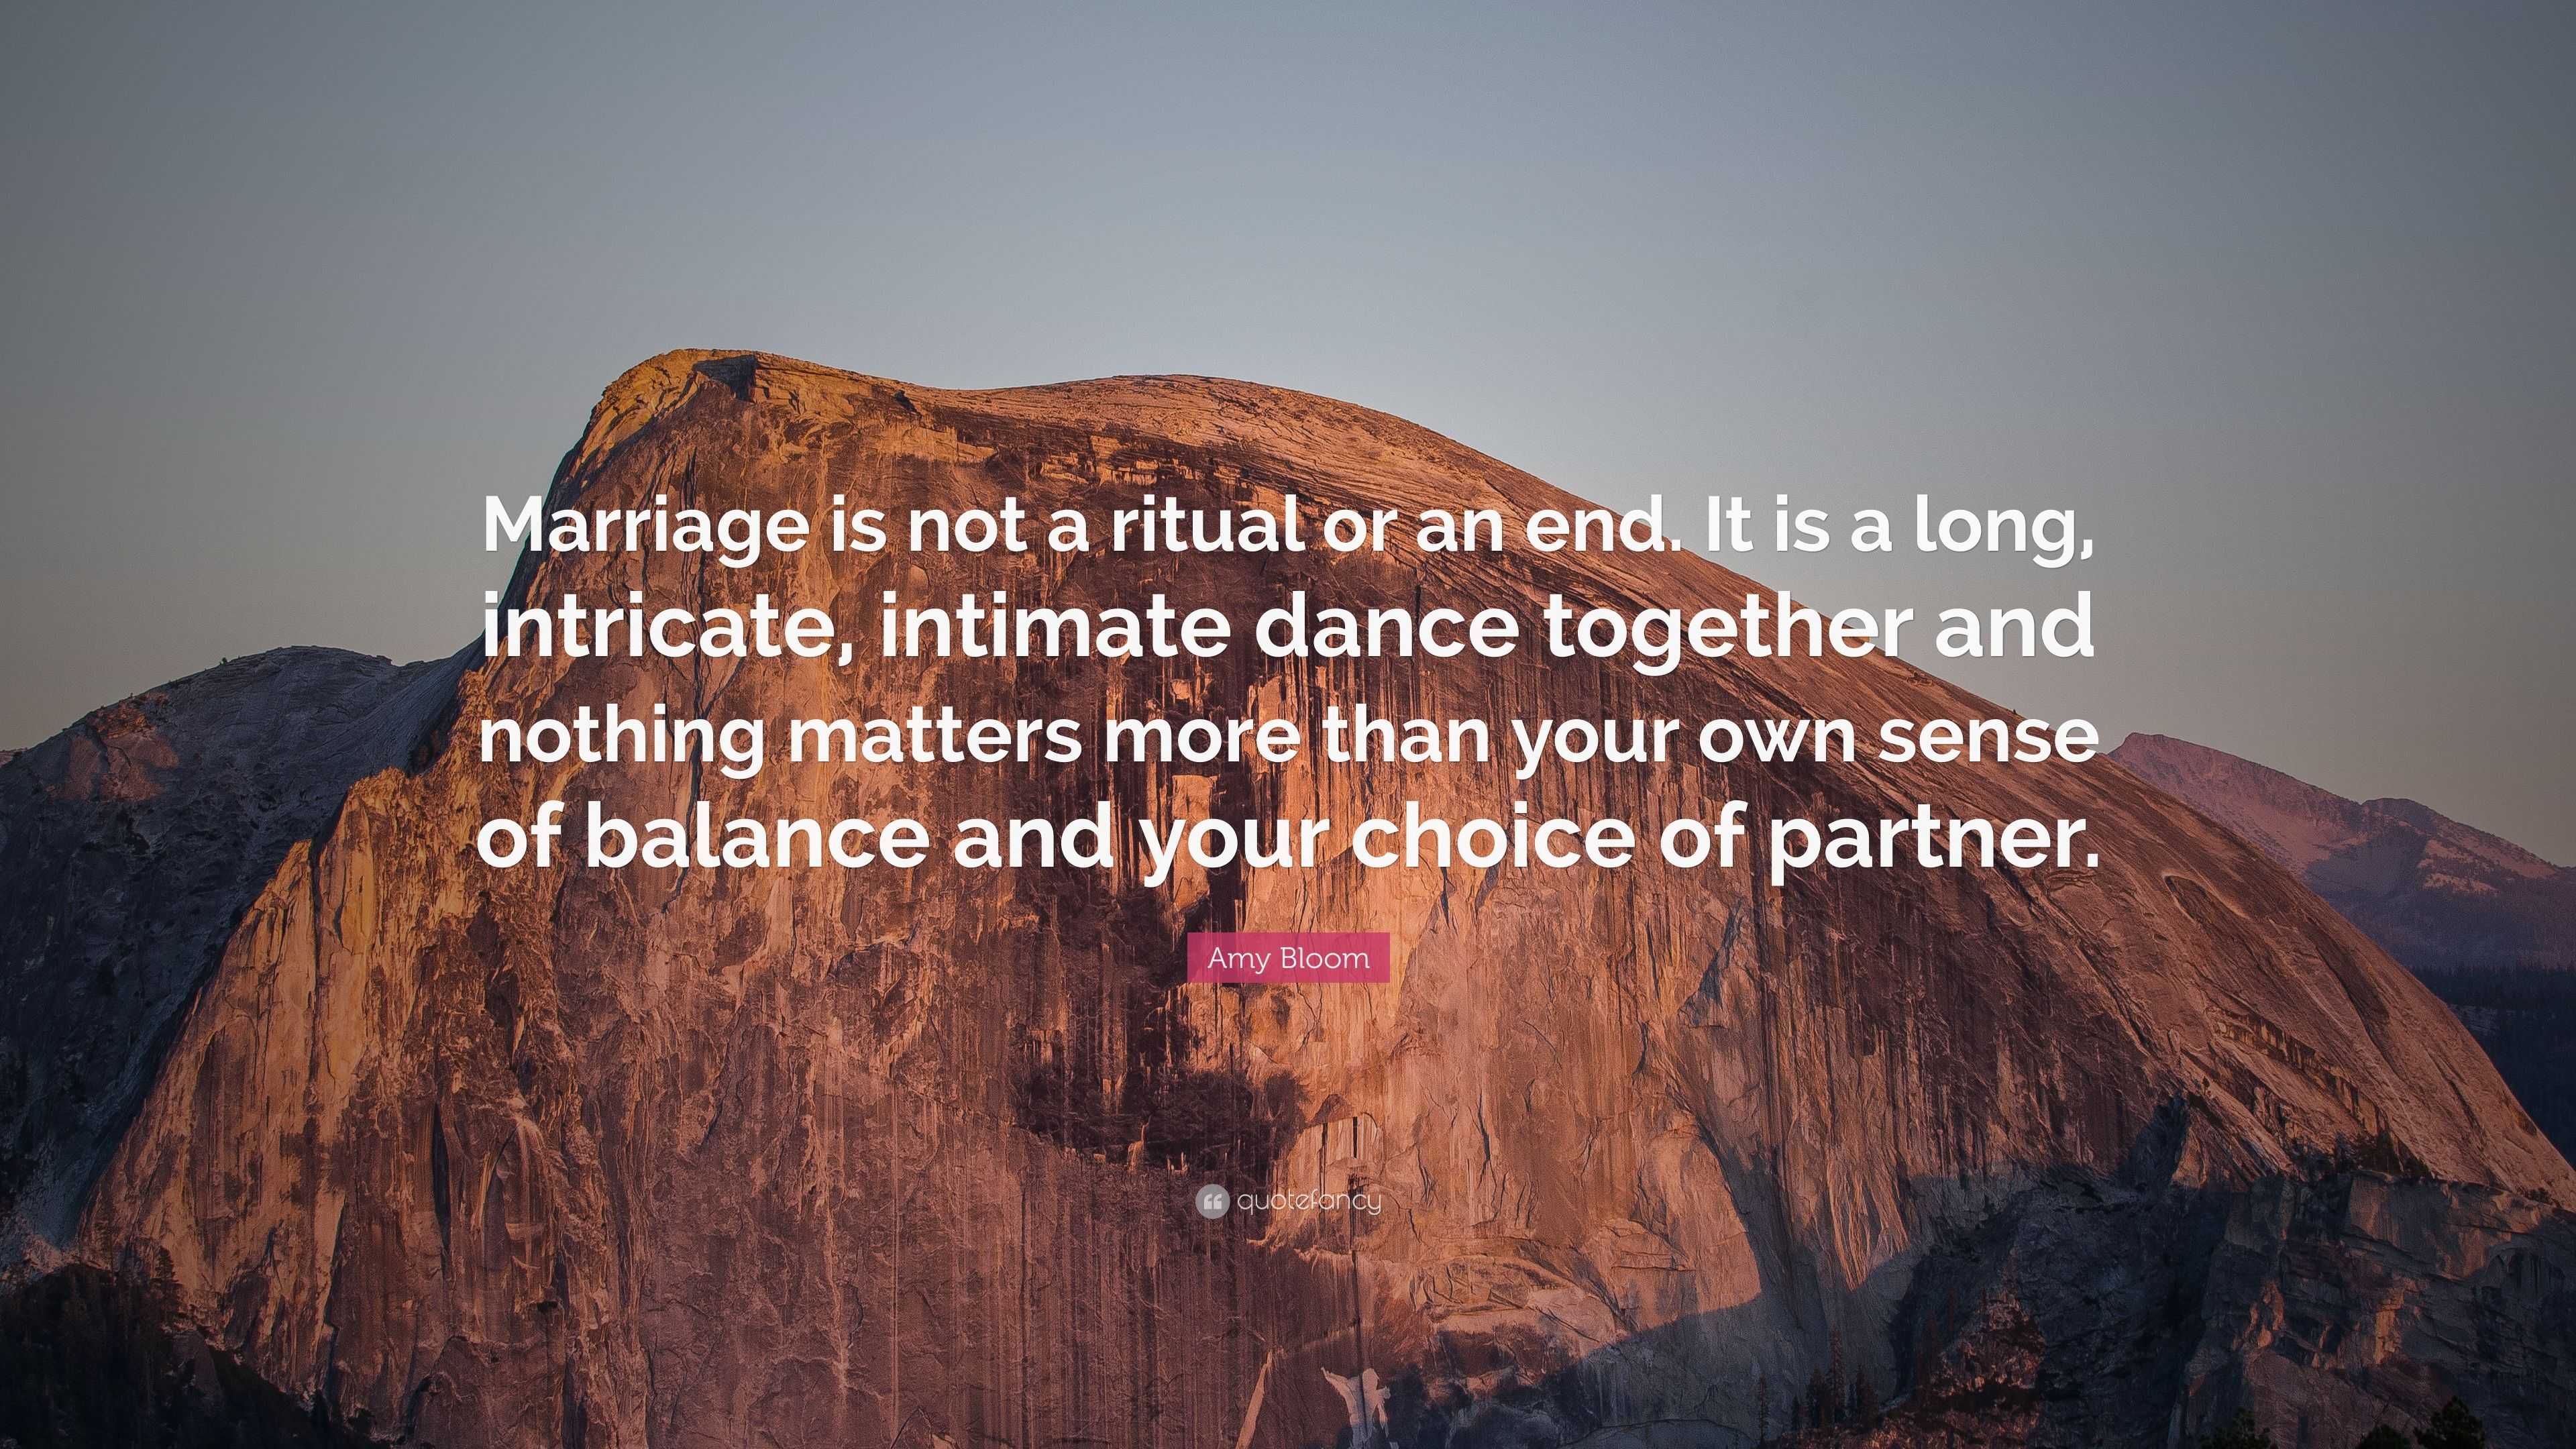 Amy Bloom Quote: “Marriage is not a ritual or an end. It is a long ...